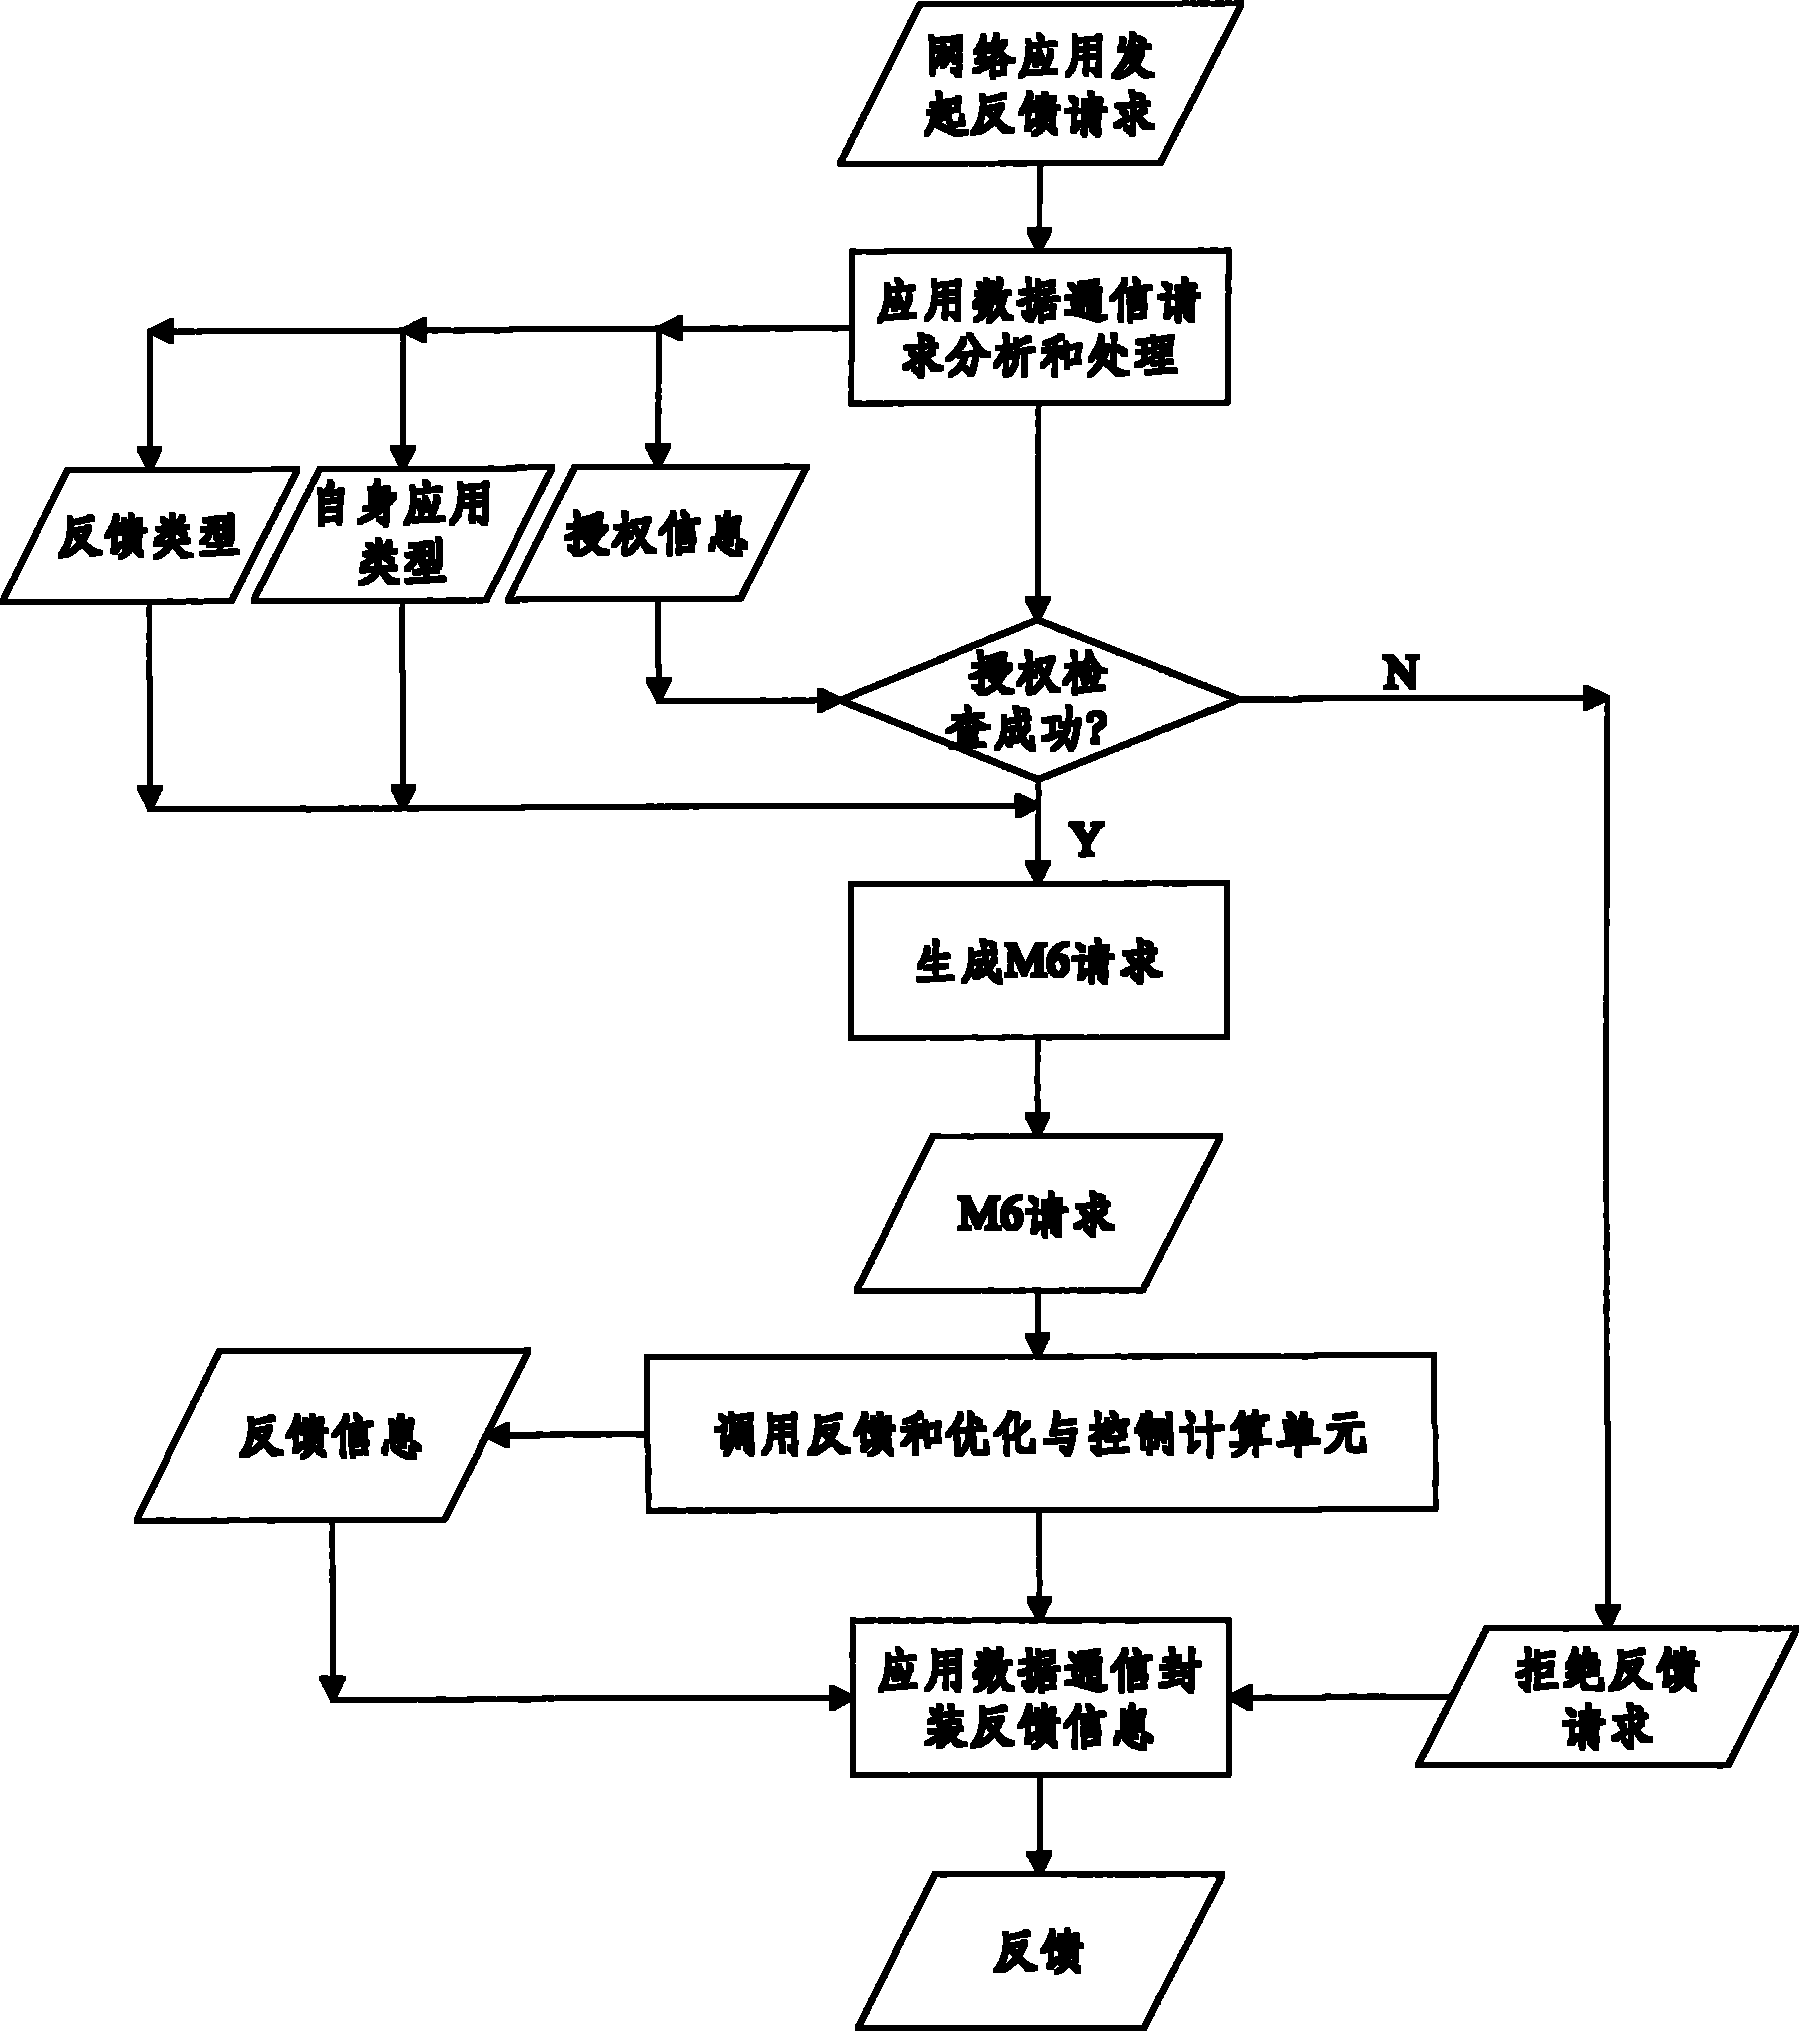 Distributed network flow combined optimization system and method based on feedback